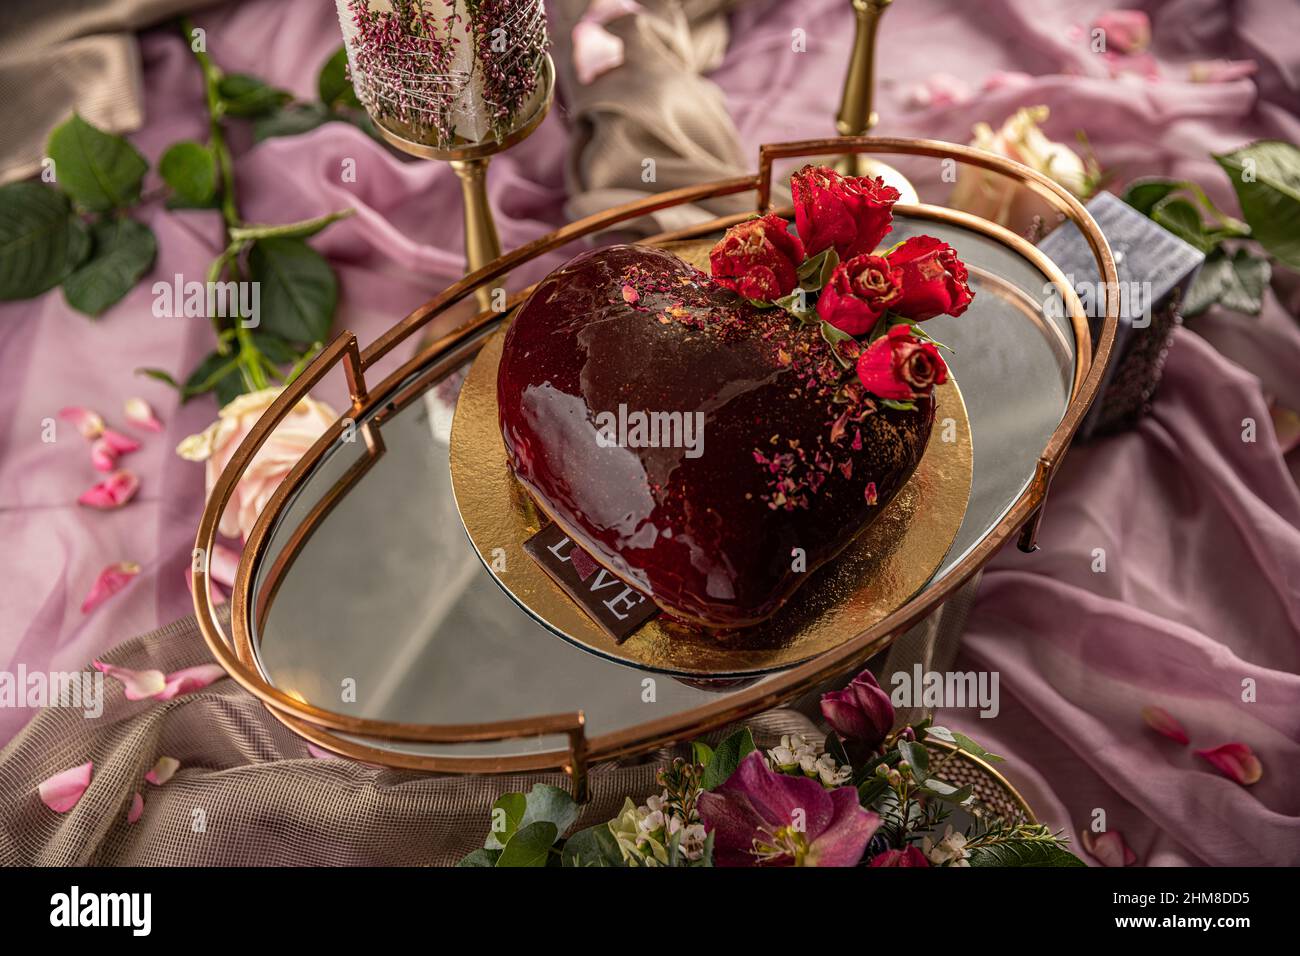 Heart shaped cake with red mirror glaze, rose on top as decoration. Stock Photo